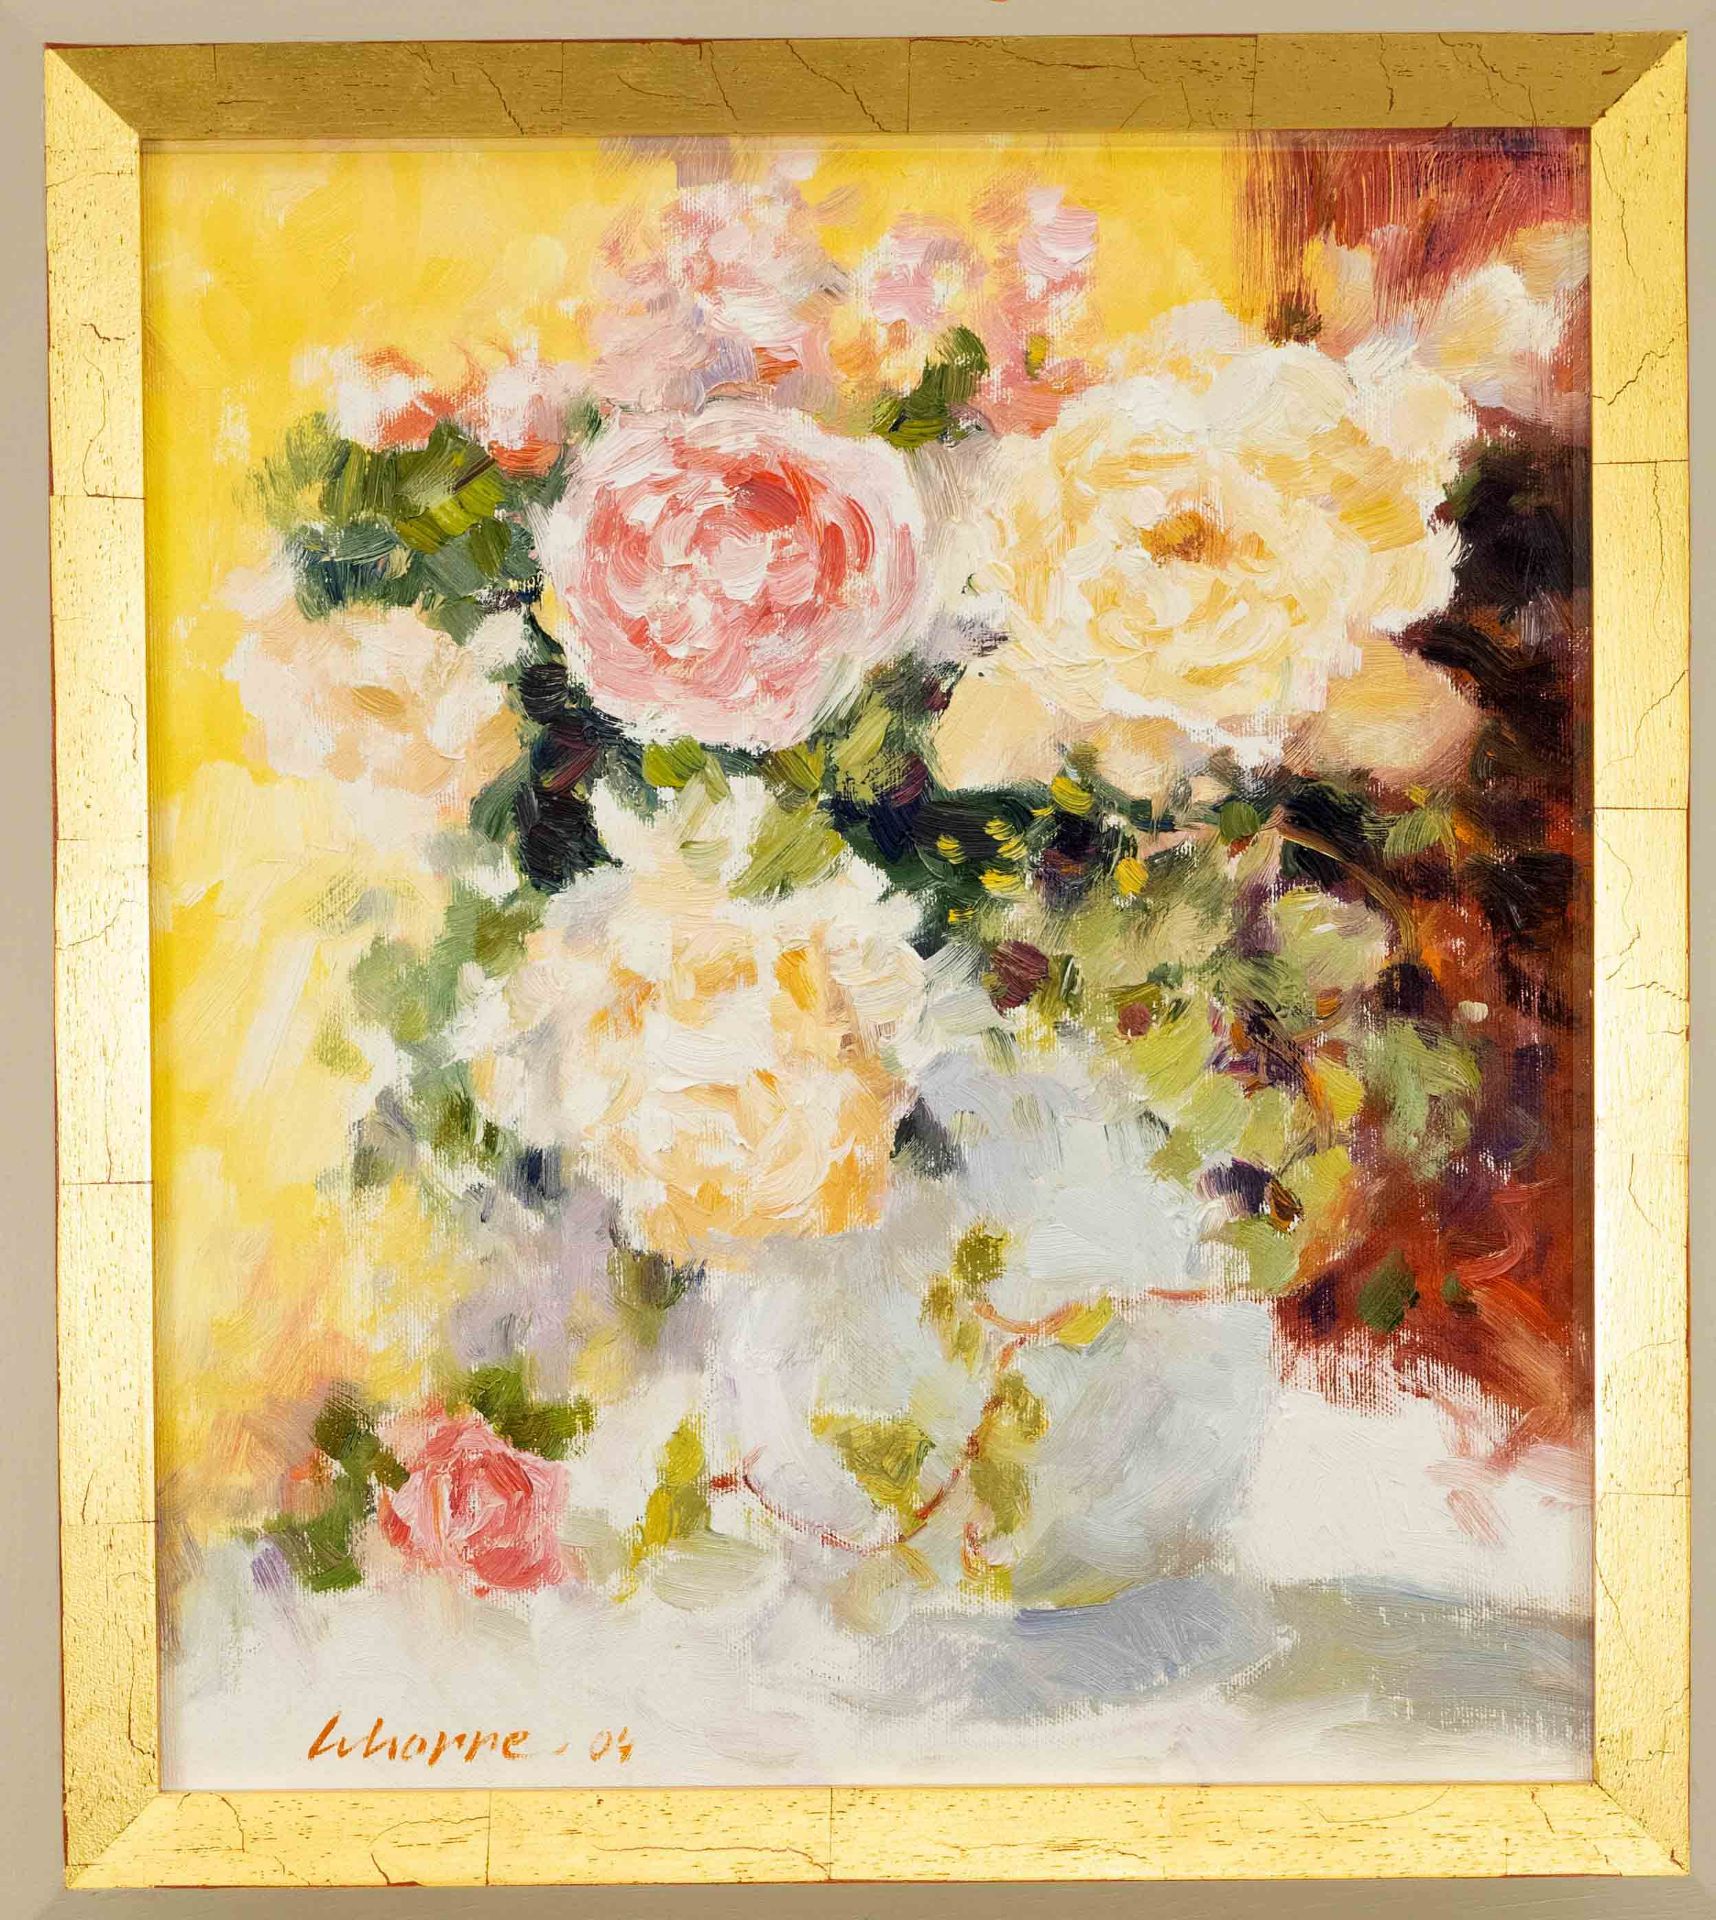 W. Hoppe, 2nd half of 20th century, ''Rose still life'', oil on cardboard, signed and dated lower